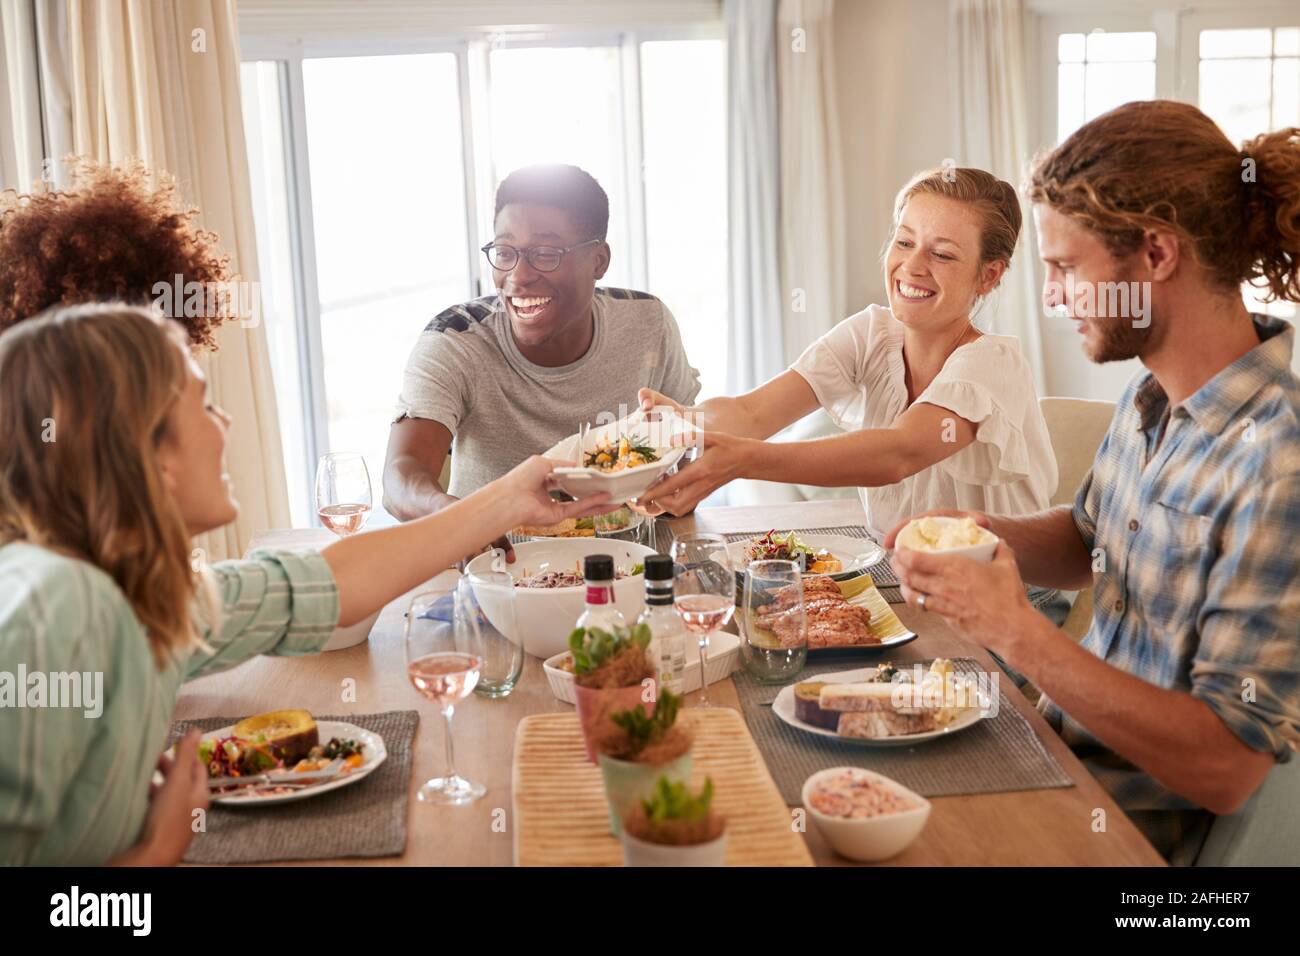 Two young adult women passing a dish across the dinner table during lunch with friends, close up Stock Photo